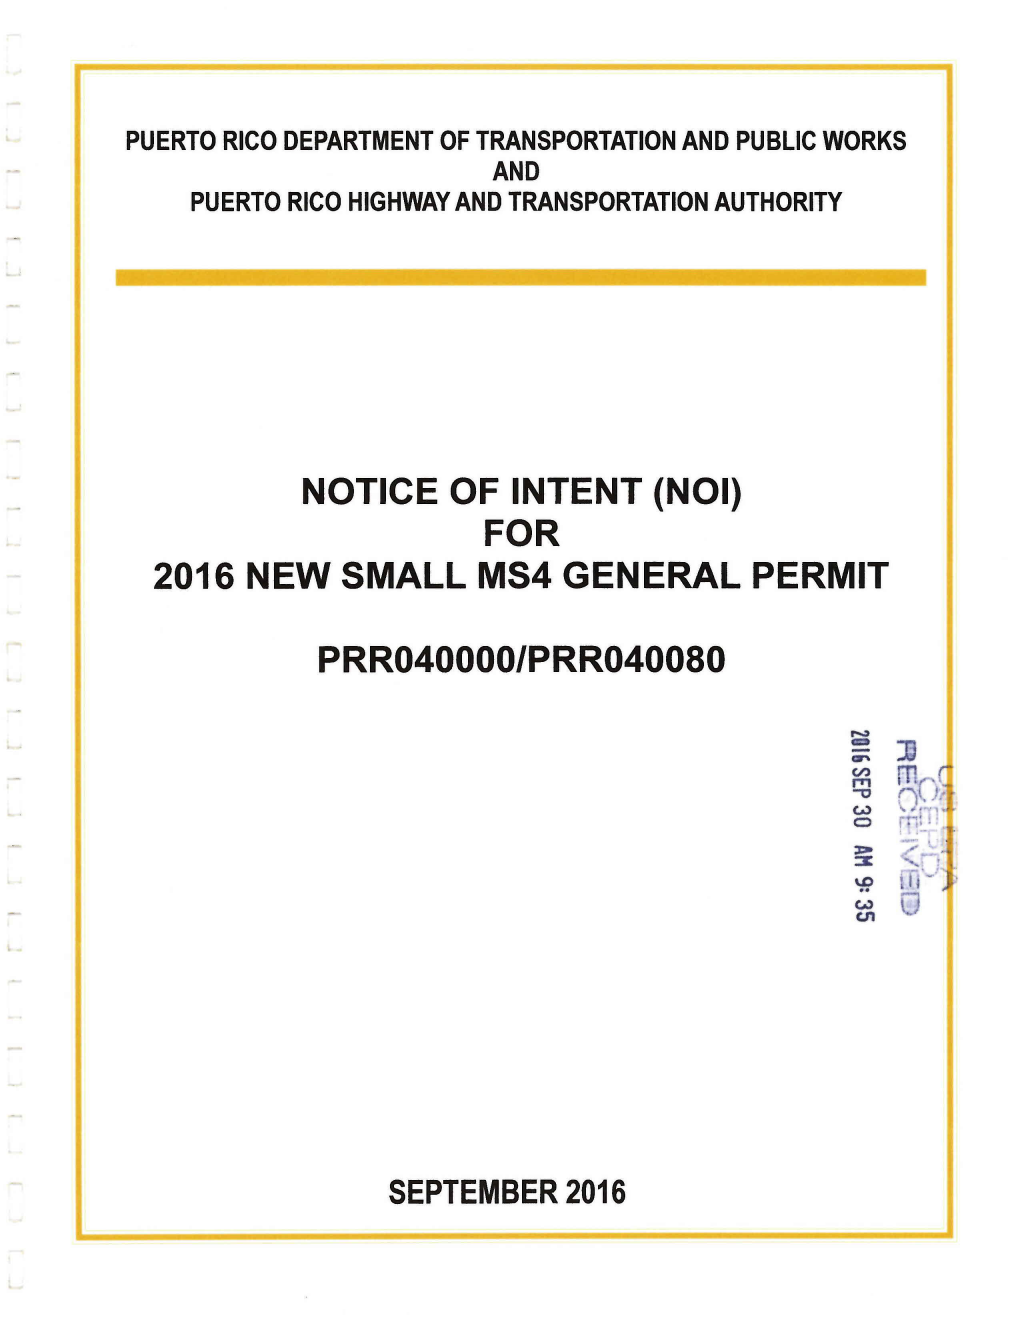 Notice of Intent (Noi) for 2016 New Small Ms4 General Permit